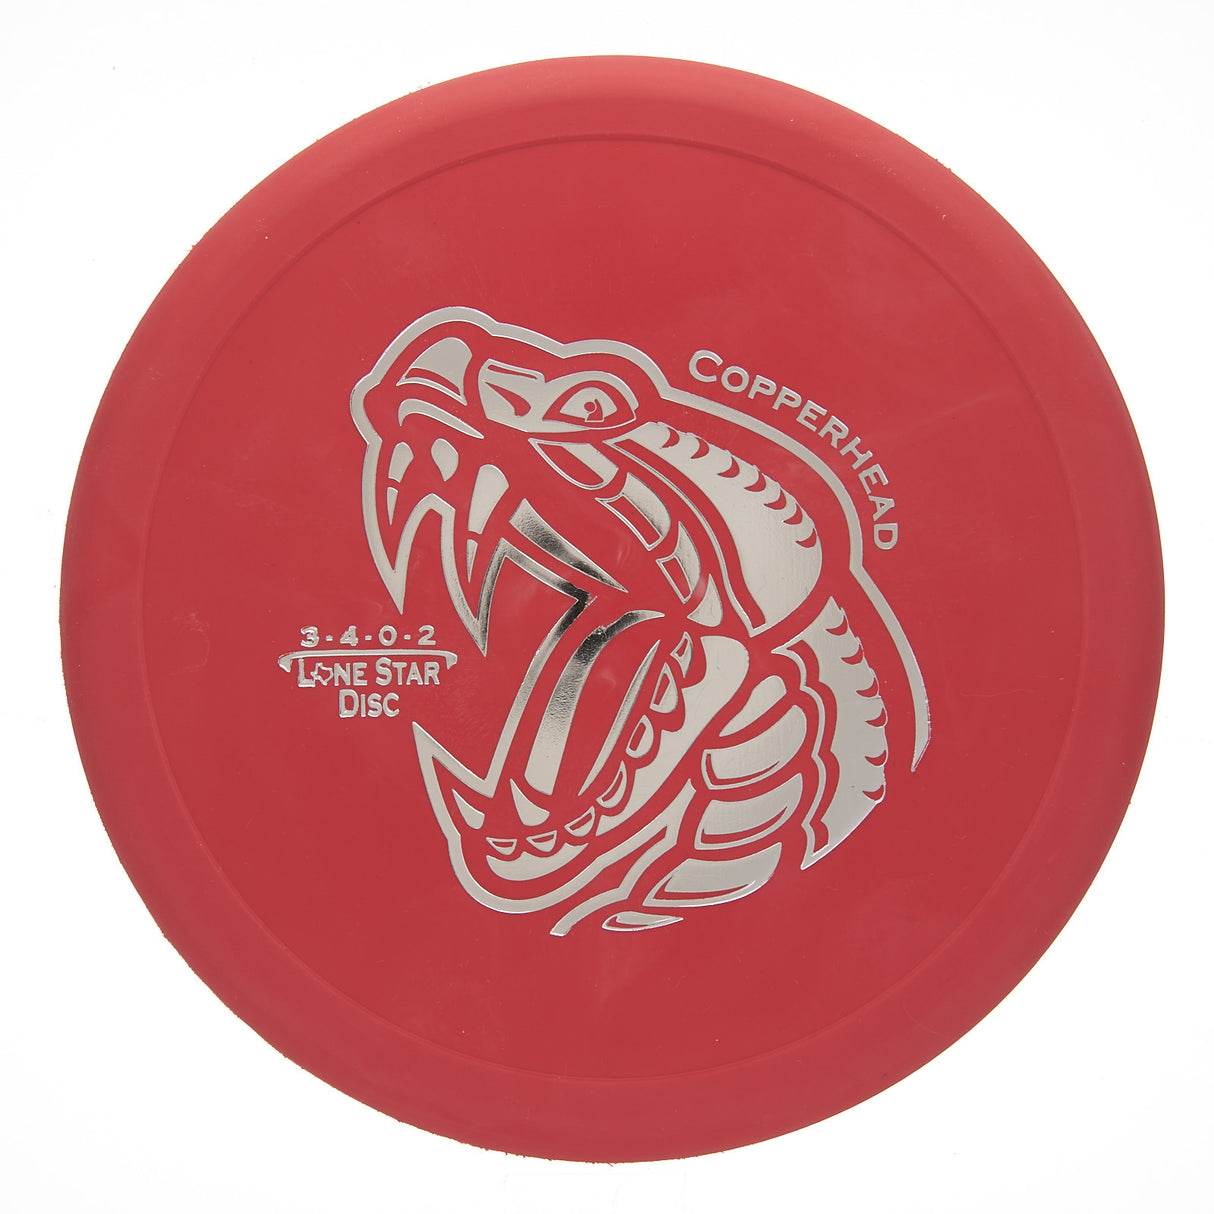 Lone Star Disc Copperhead - Artist Series Victor 2 170g | Style 0001